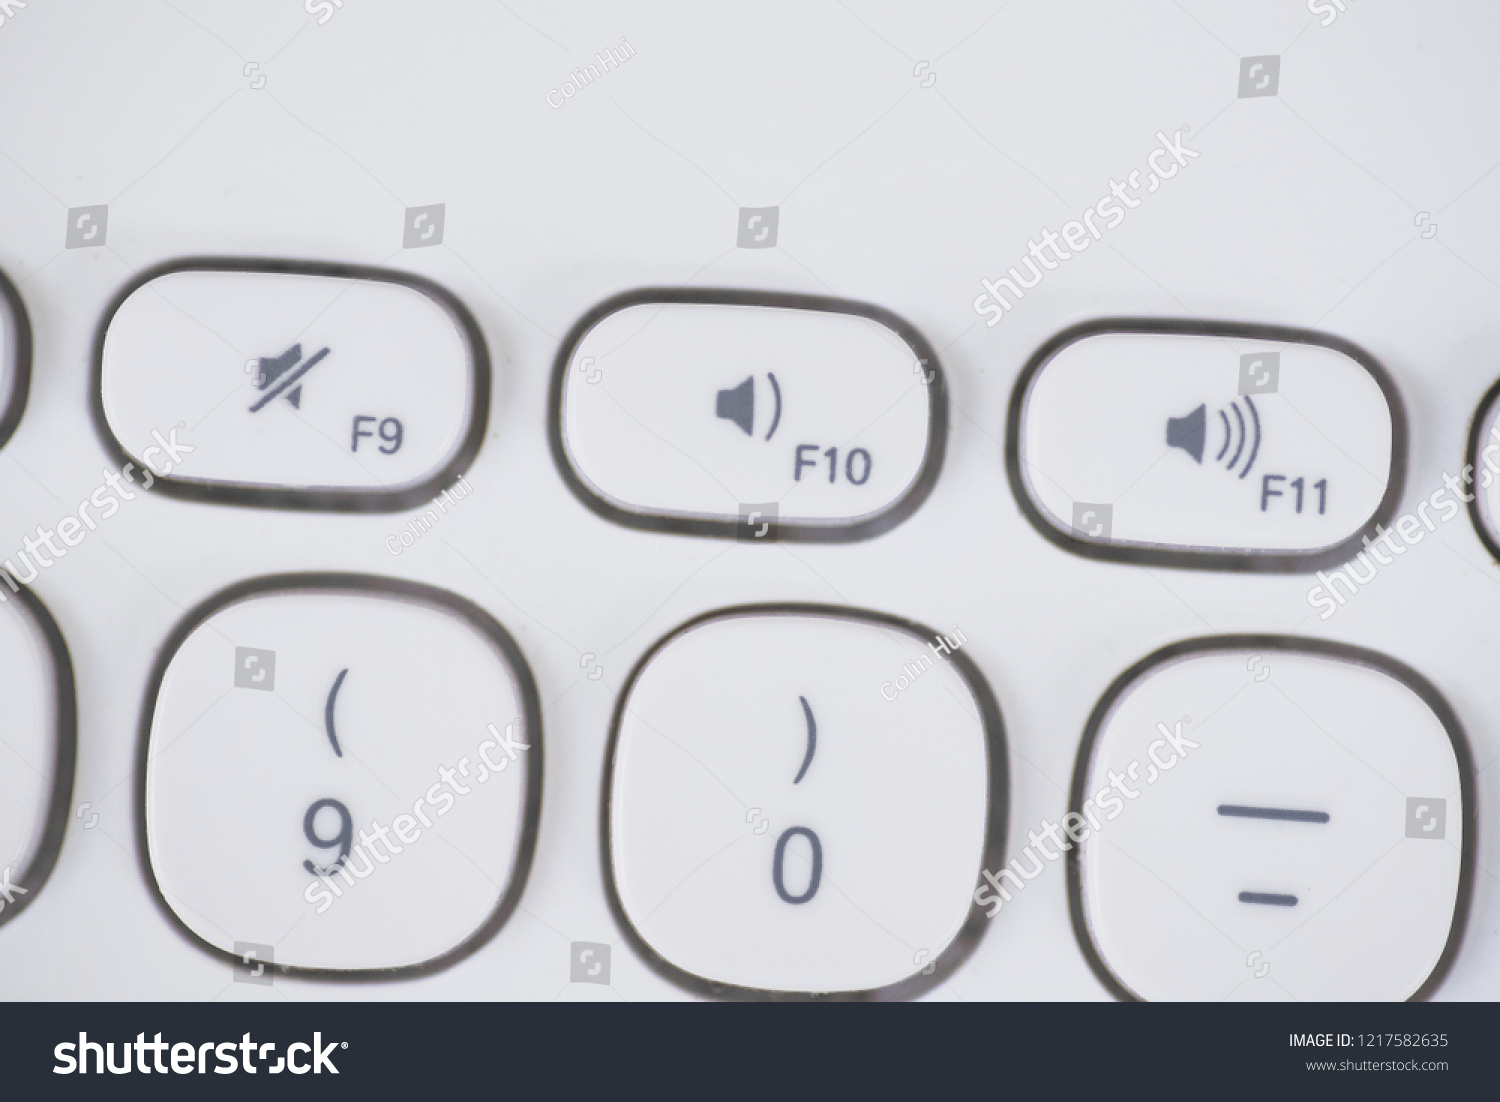 Close-up of Volume Shortcut keys of a white keyboard. Mute, volume down and volume up. #1217582635